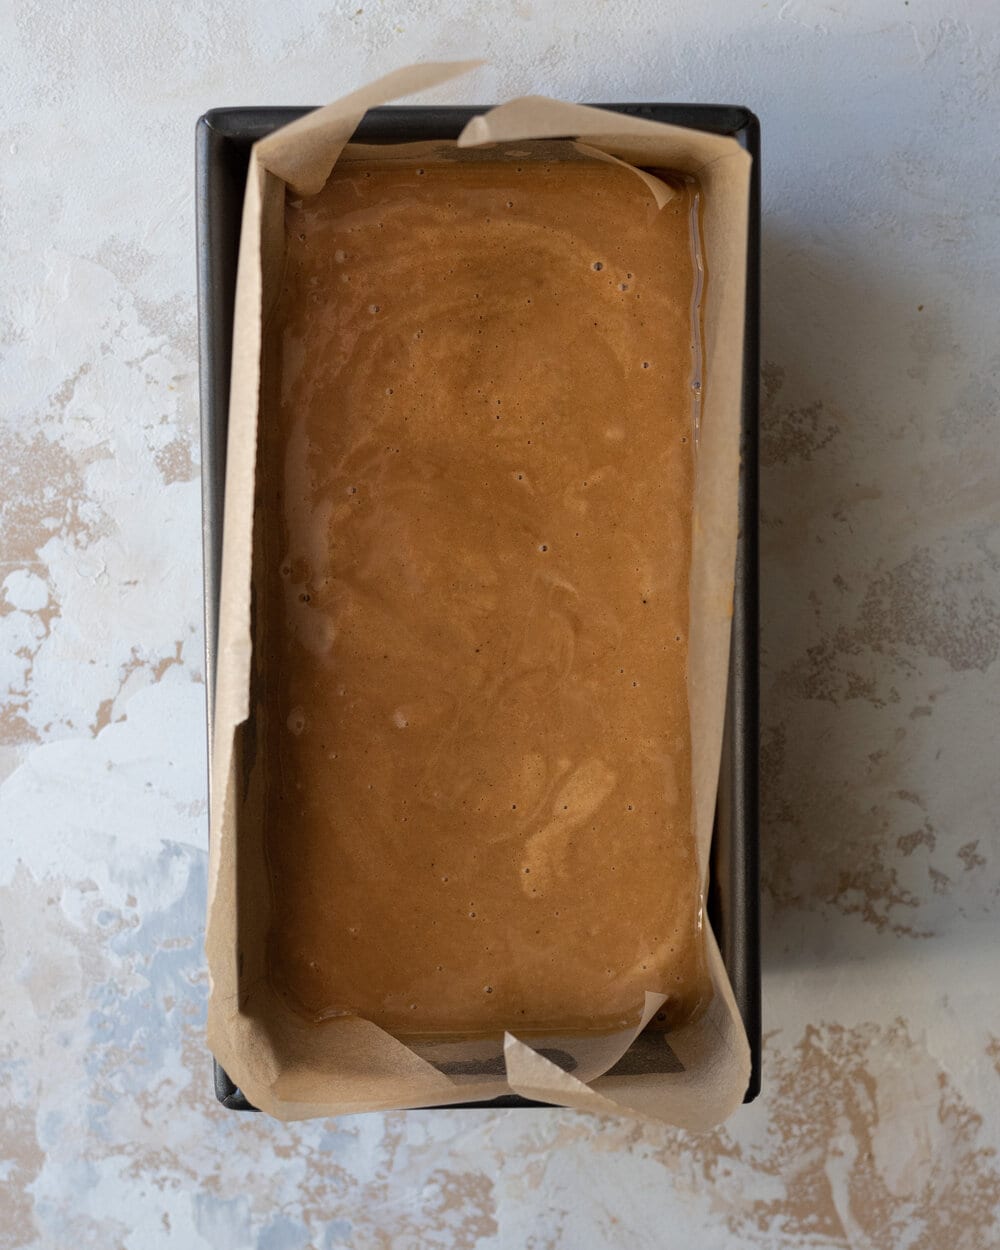 Cake batter in a loaf pan lined with parchment paper.